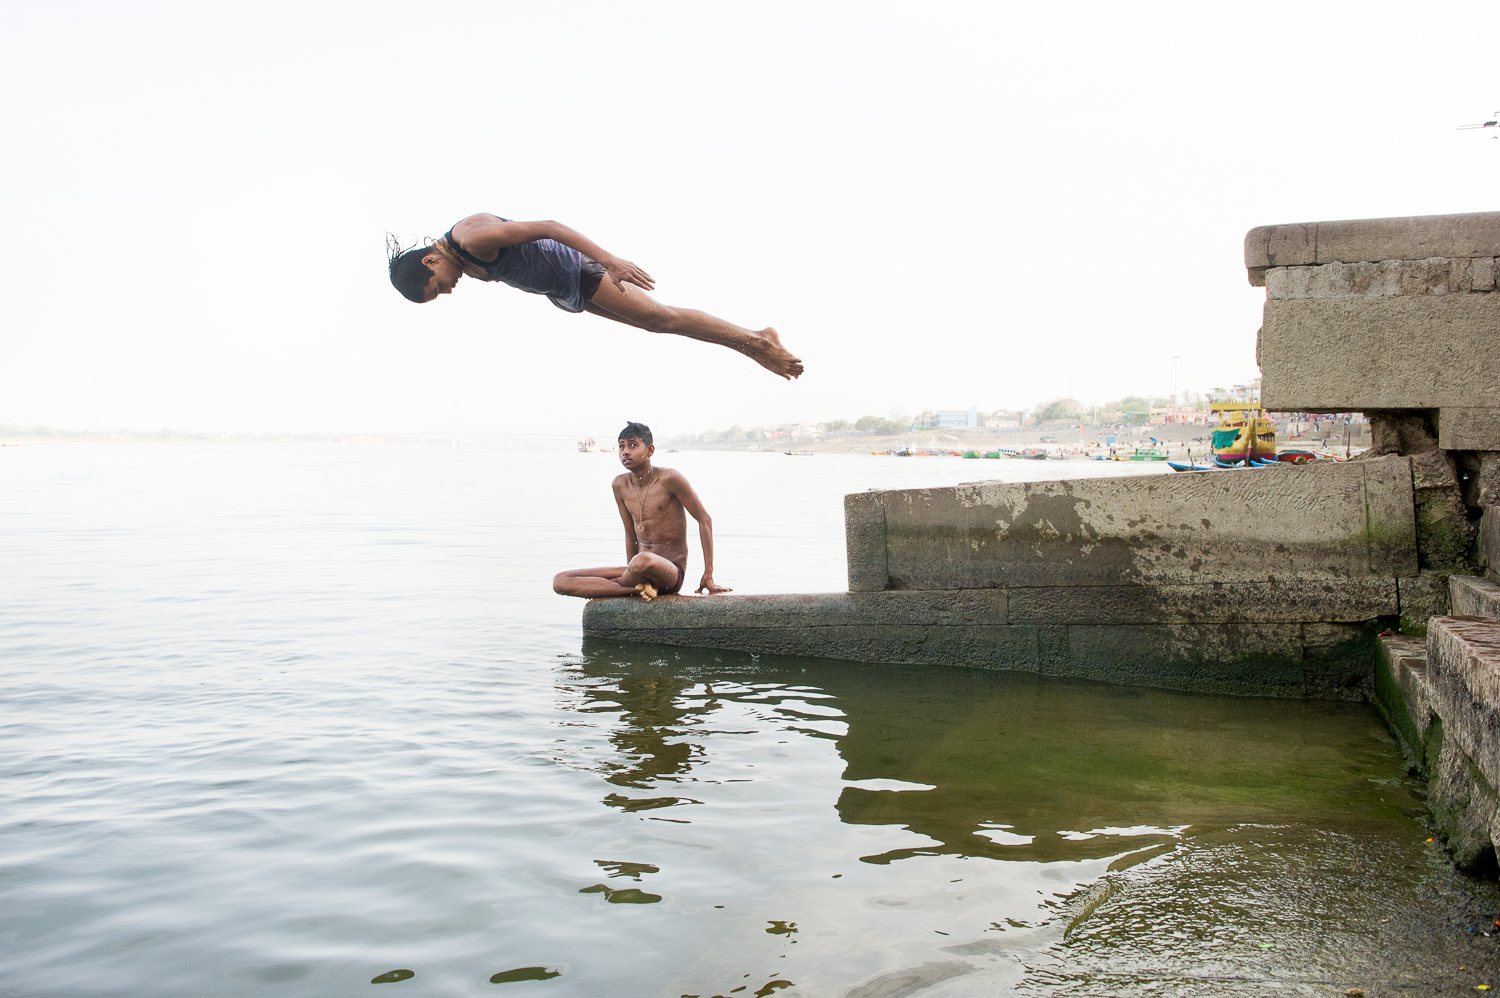  Bather jumping into the Ganges river, Varanasi, 2019 